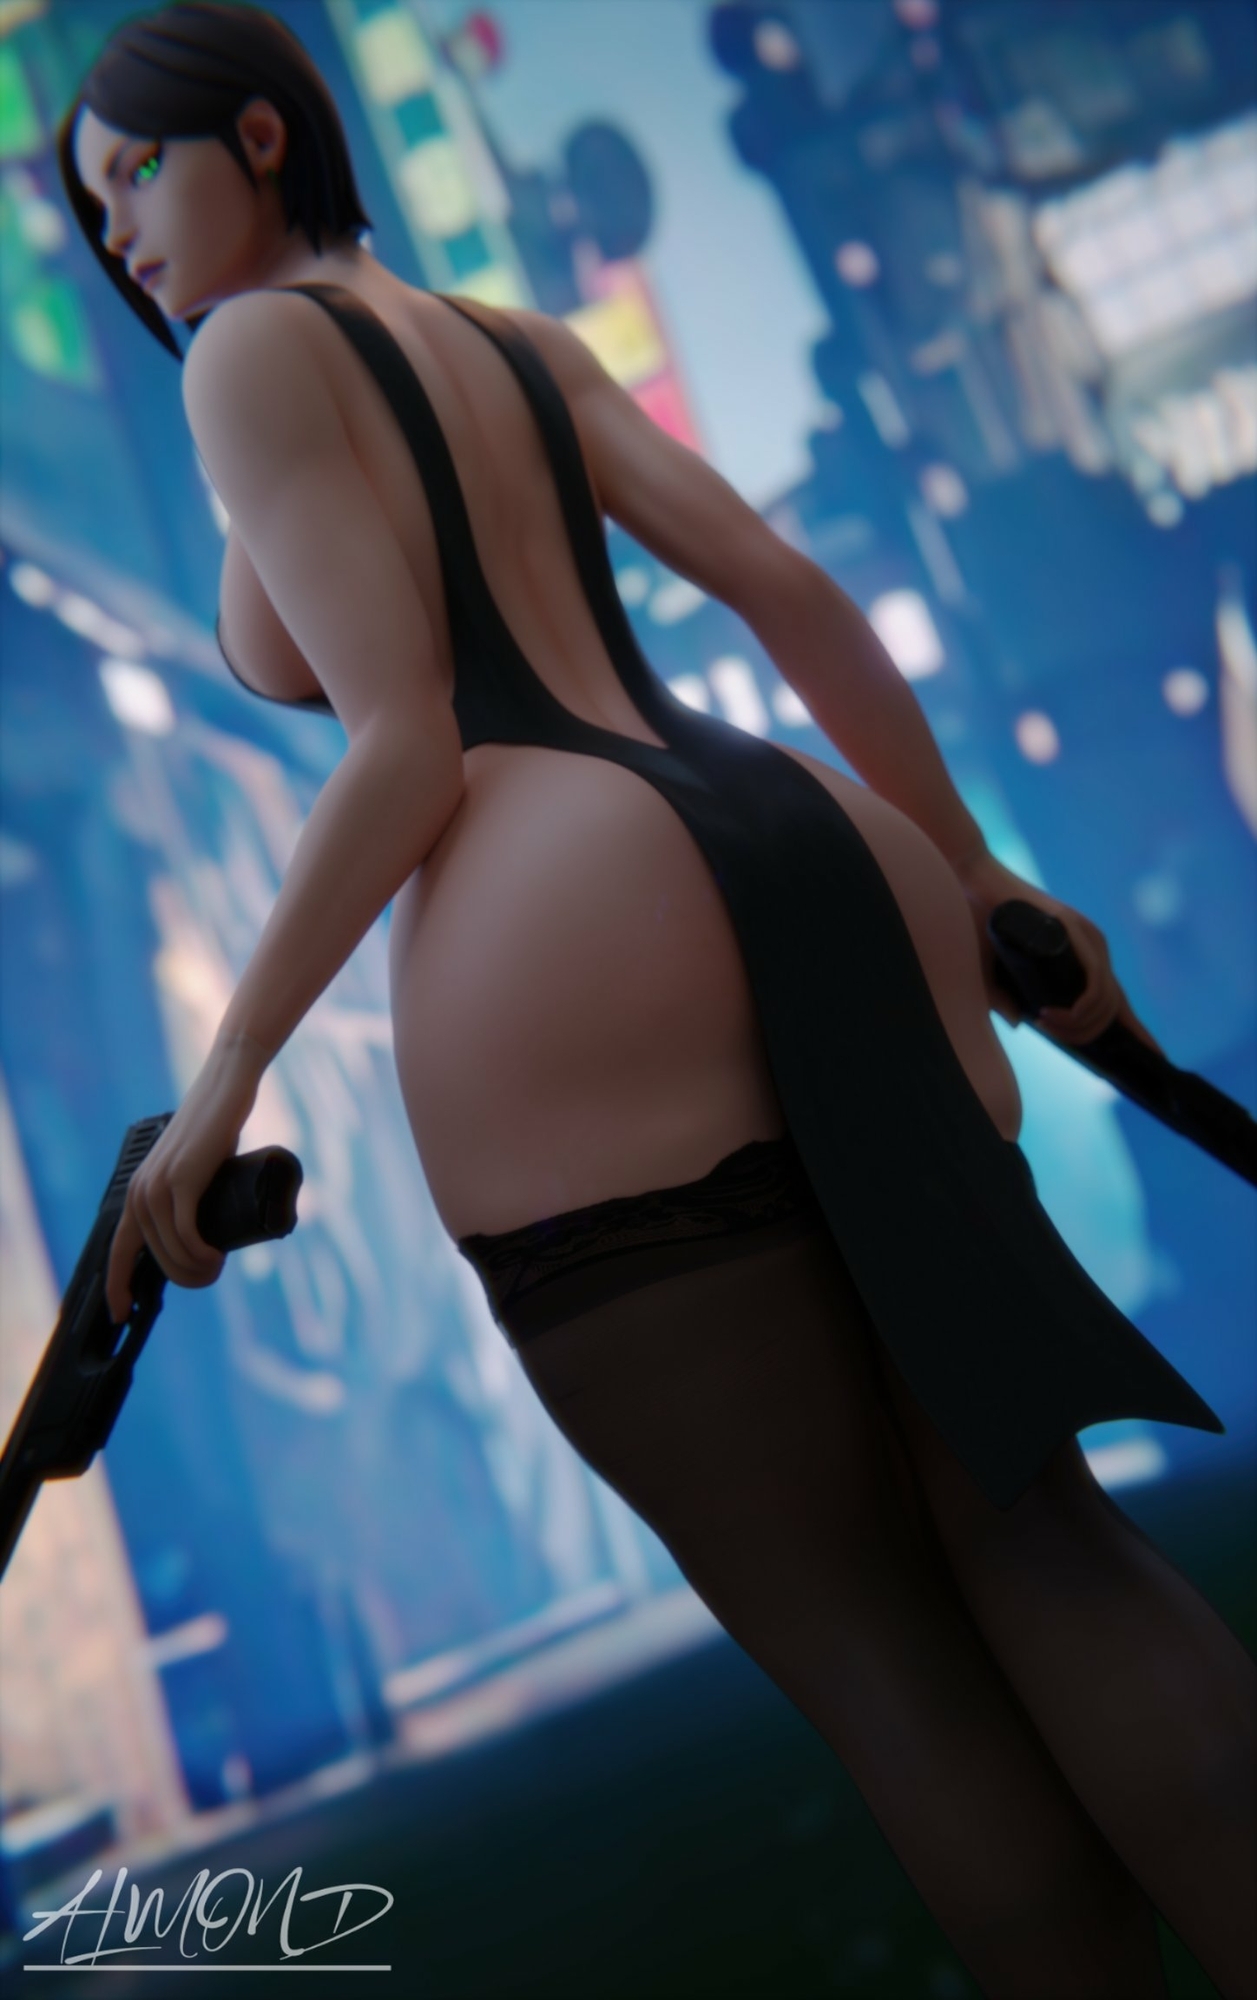 Viper! 🐍 Viper Valorant (game) 3dnsfw Nude Nudity Big Booty Curvy Big Boobs Tall Girl Short Hair Stockings Thick Thighs Partially_clothed